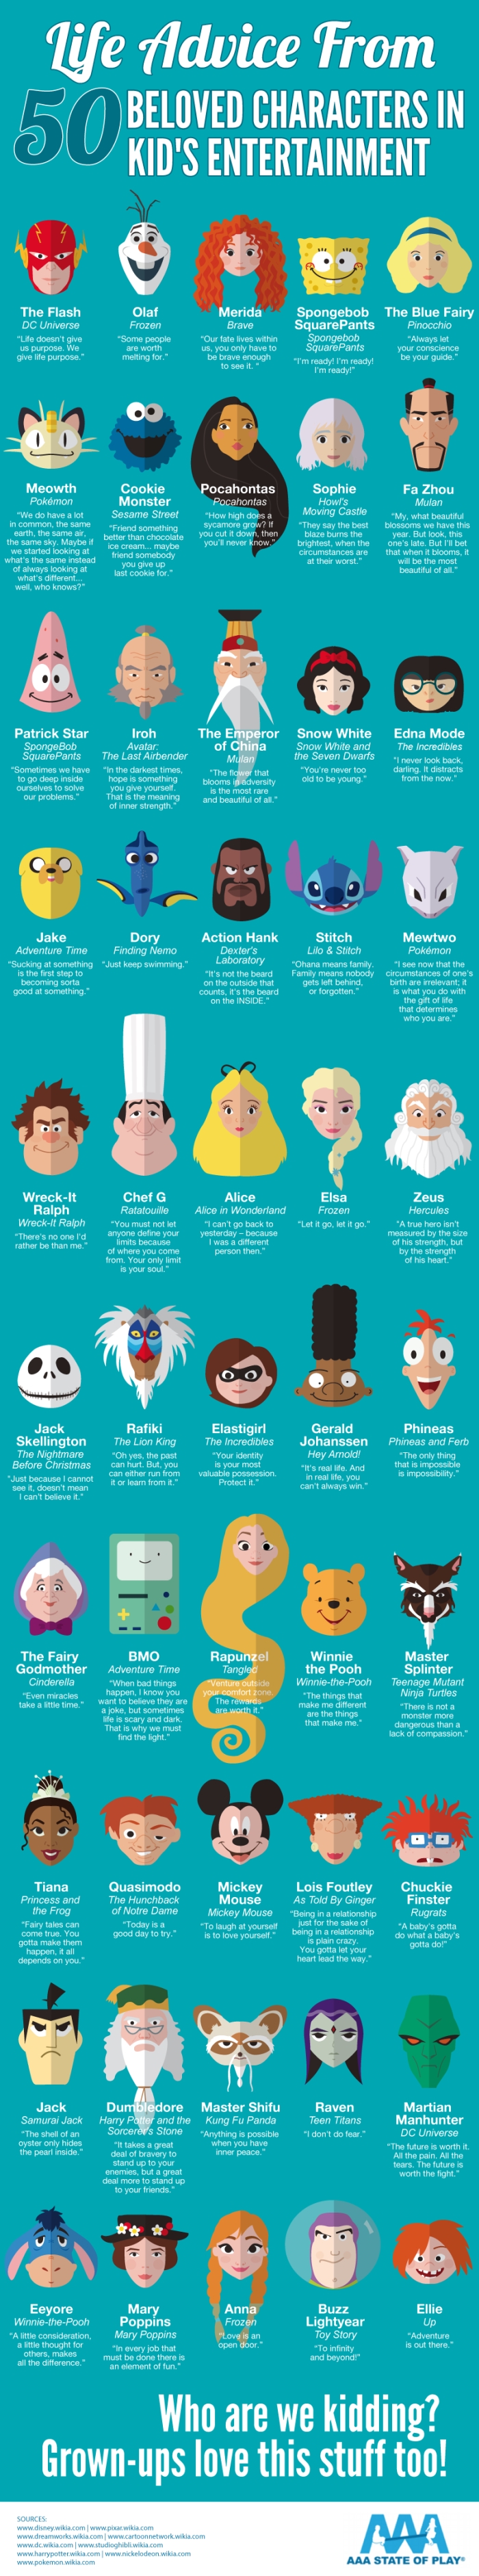 Characters In Kid's Entertainment Always Give The Best Life Advice (infographic)